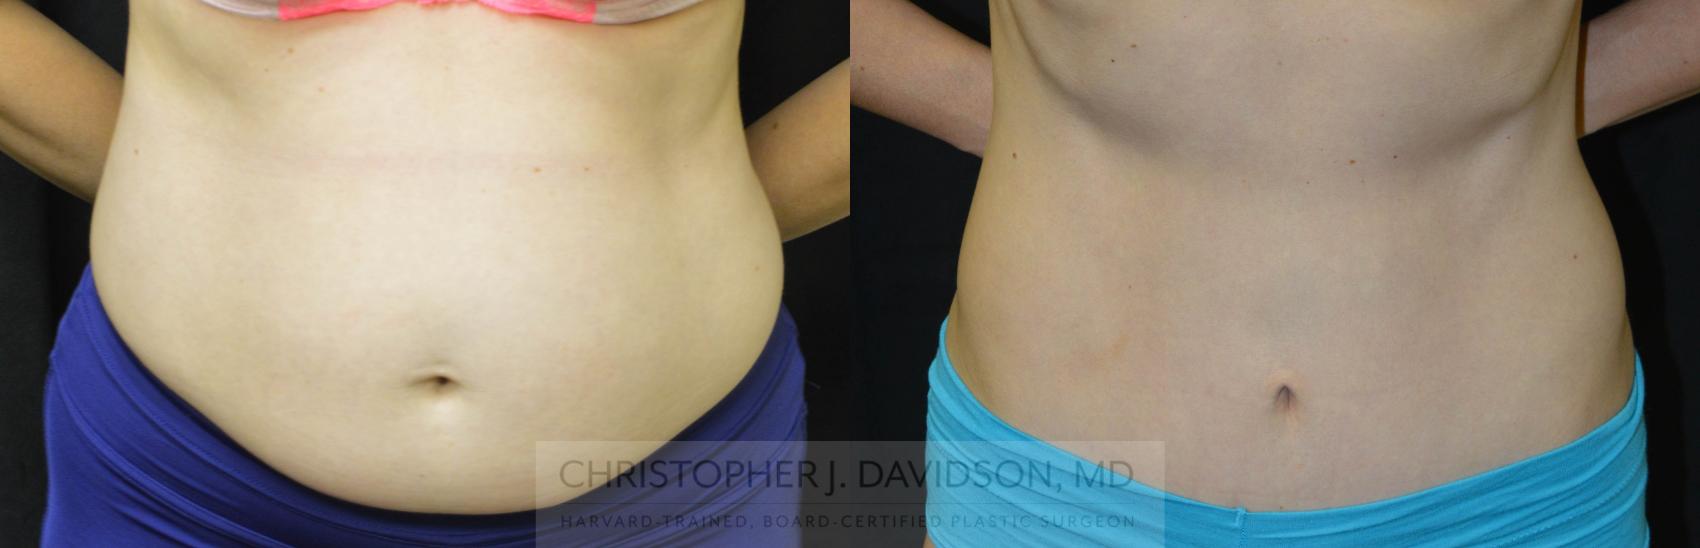 Tummy Tuck (Abdominoplasty) Case 40 Before & After View #1 | Wellesley, MA | Christopher J. Davidson, MD